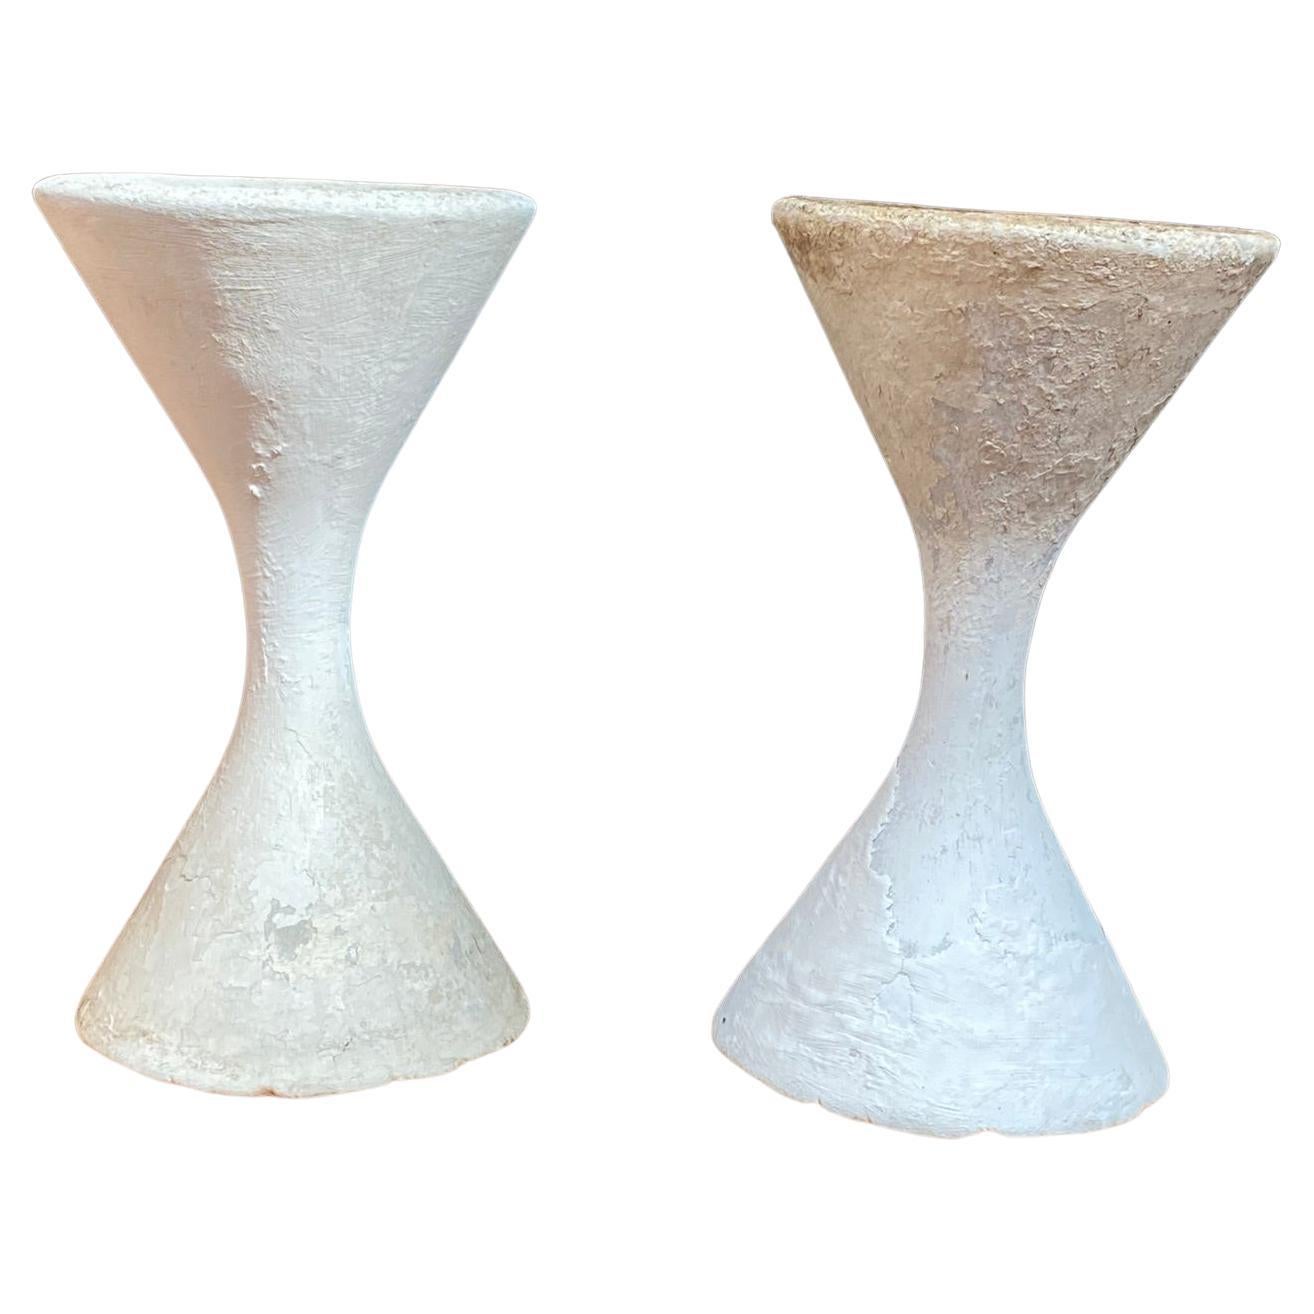 2 Small Spindle or Diabolo Planter Designed by Swiss Architect Willy Guhl